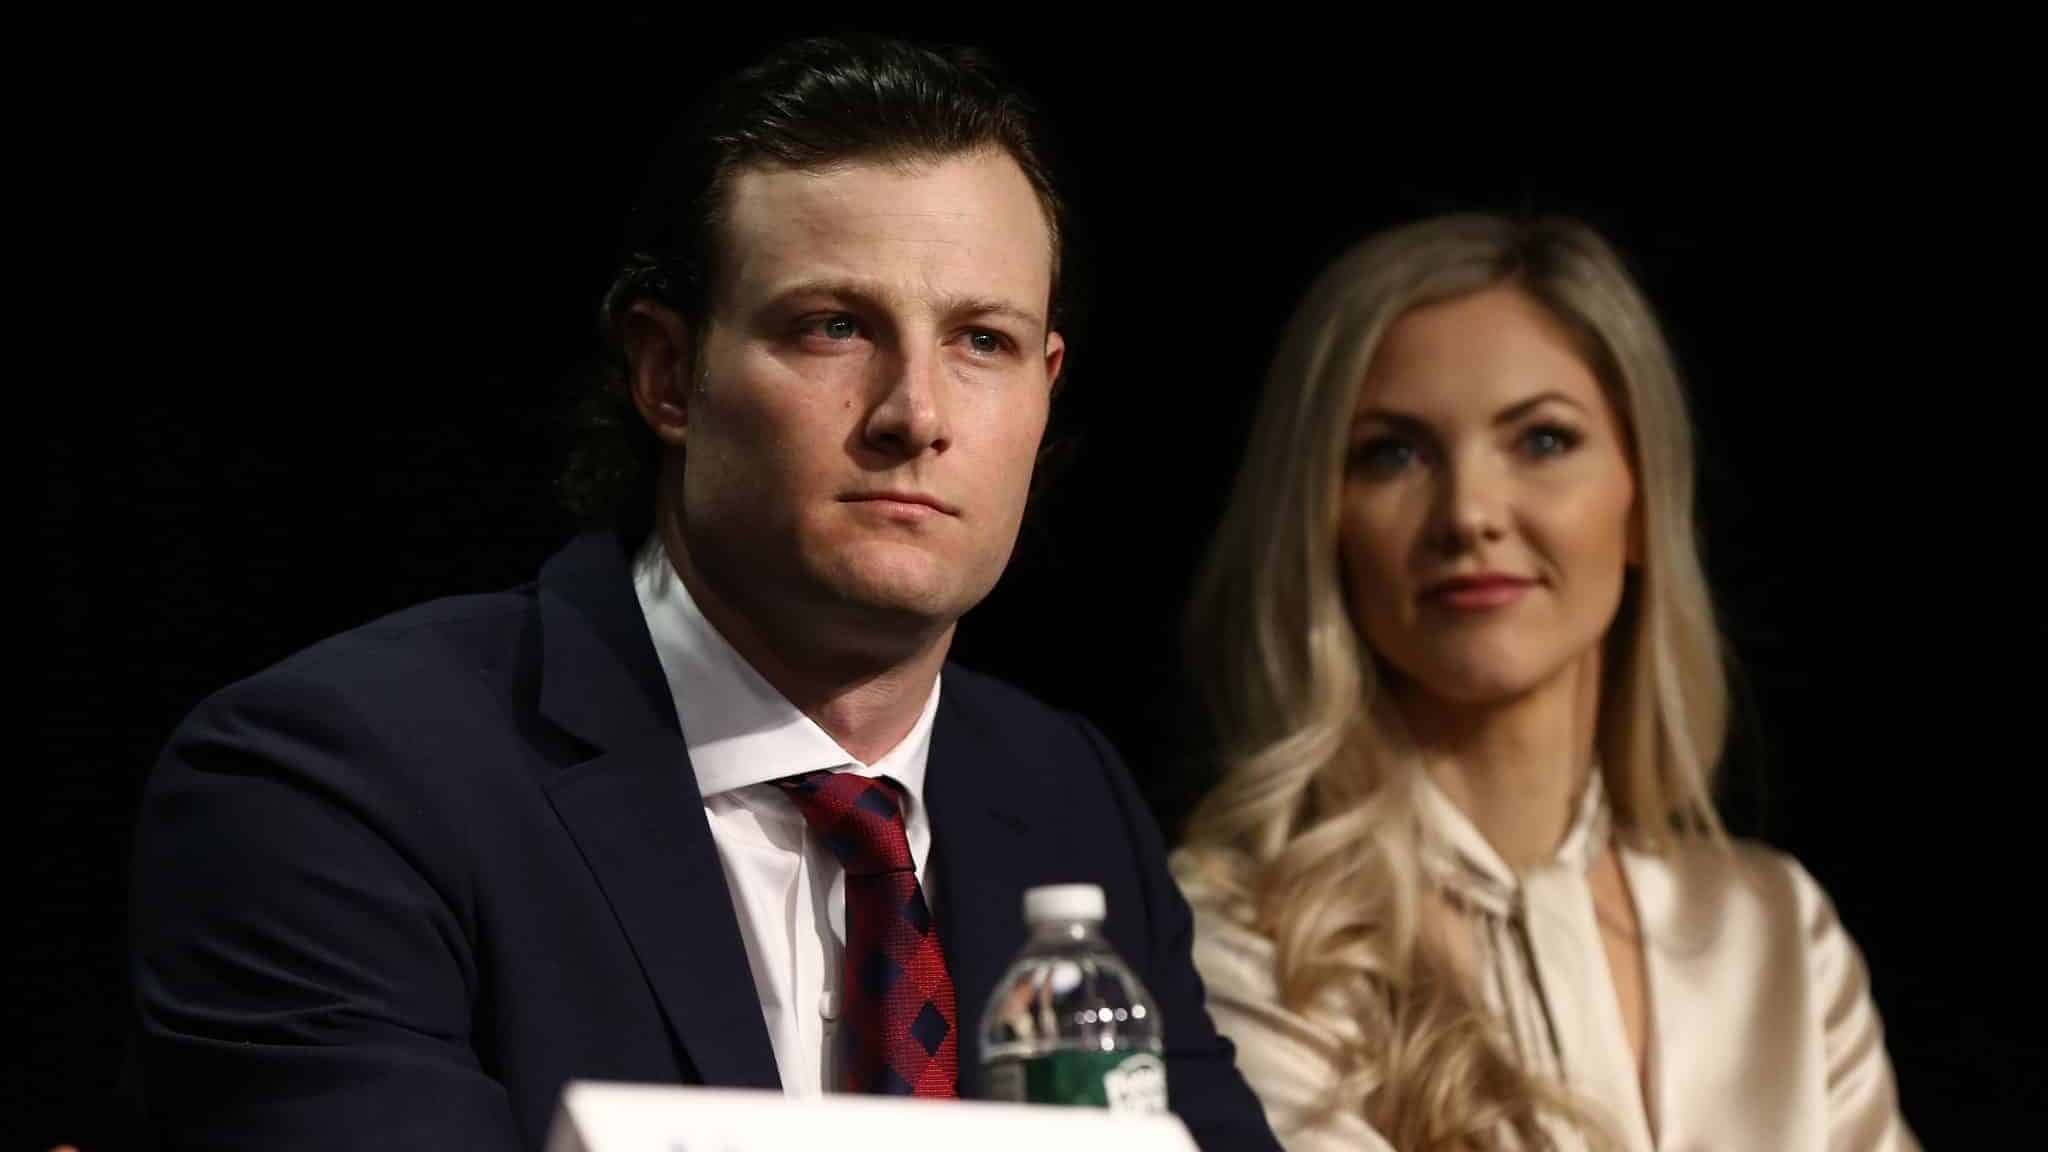 NEW YORK, NEW YORK - DECEMBER 18: Gerrit Cole and his wife Amy Cole looks on during a press conference at Yankee Stadium during a press conference at Yankee Stadium on December 18, 2019 in New York City.